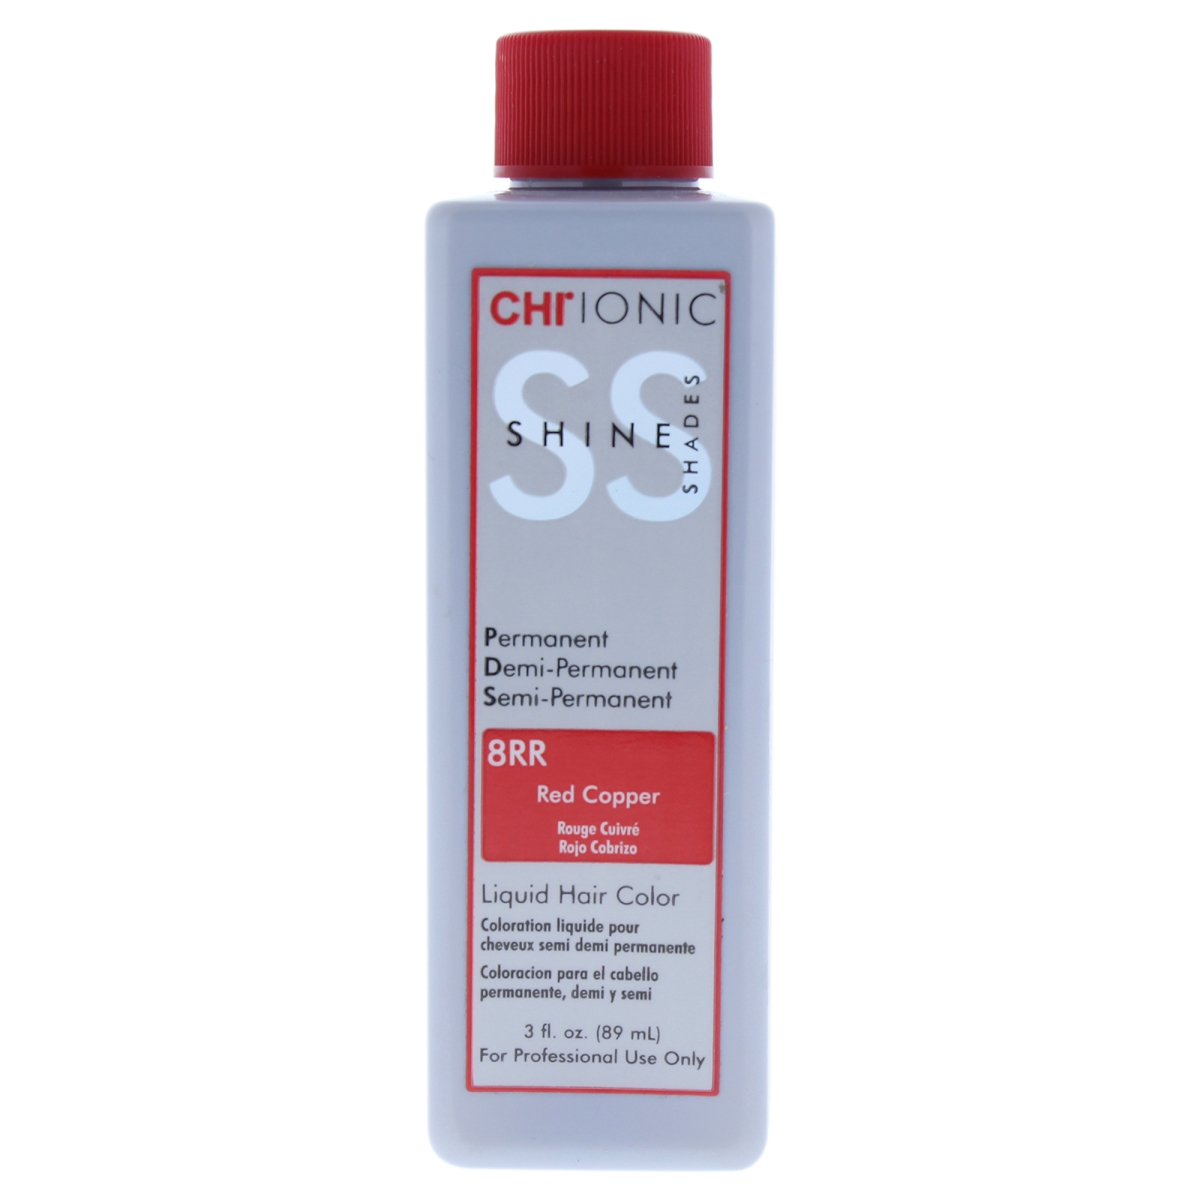 I0084049 Ionic Shine Shades Liquid Hair Color For Unisex - 8rr Red Copper - 3 Oz